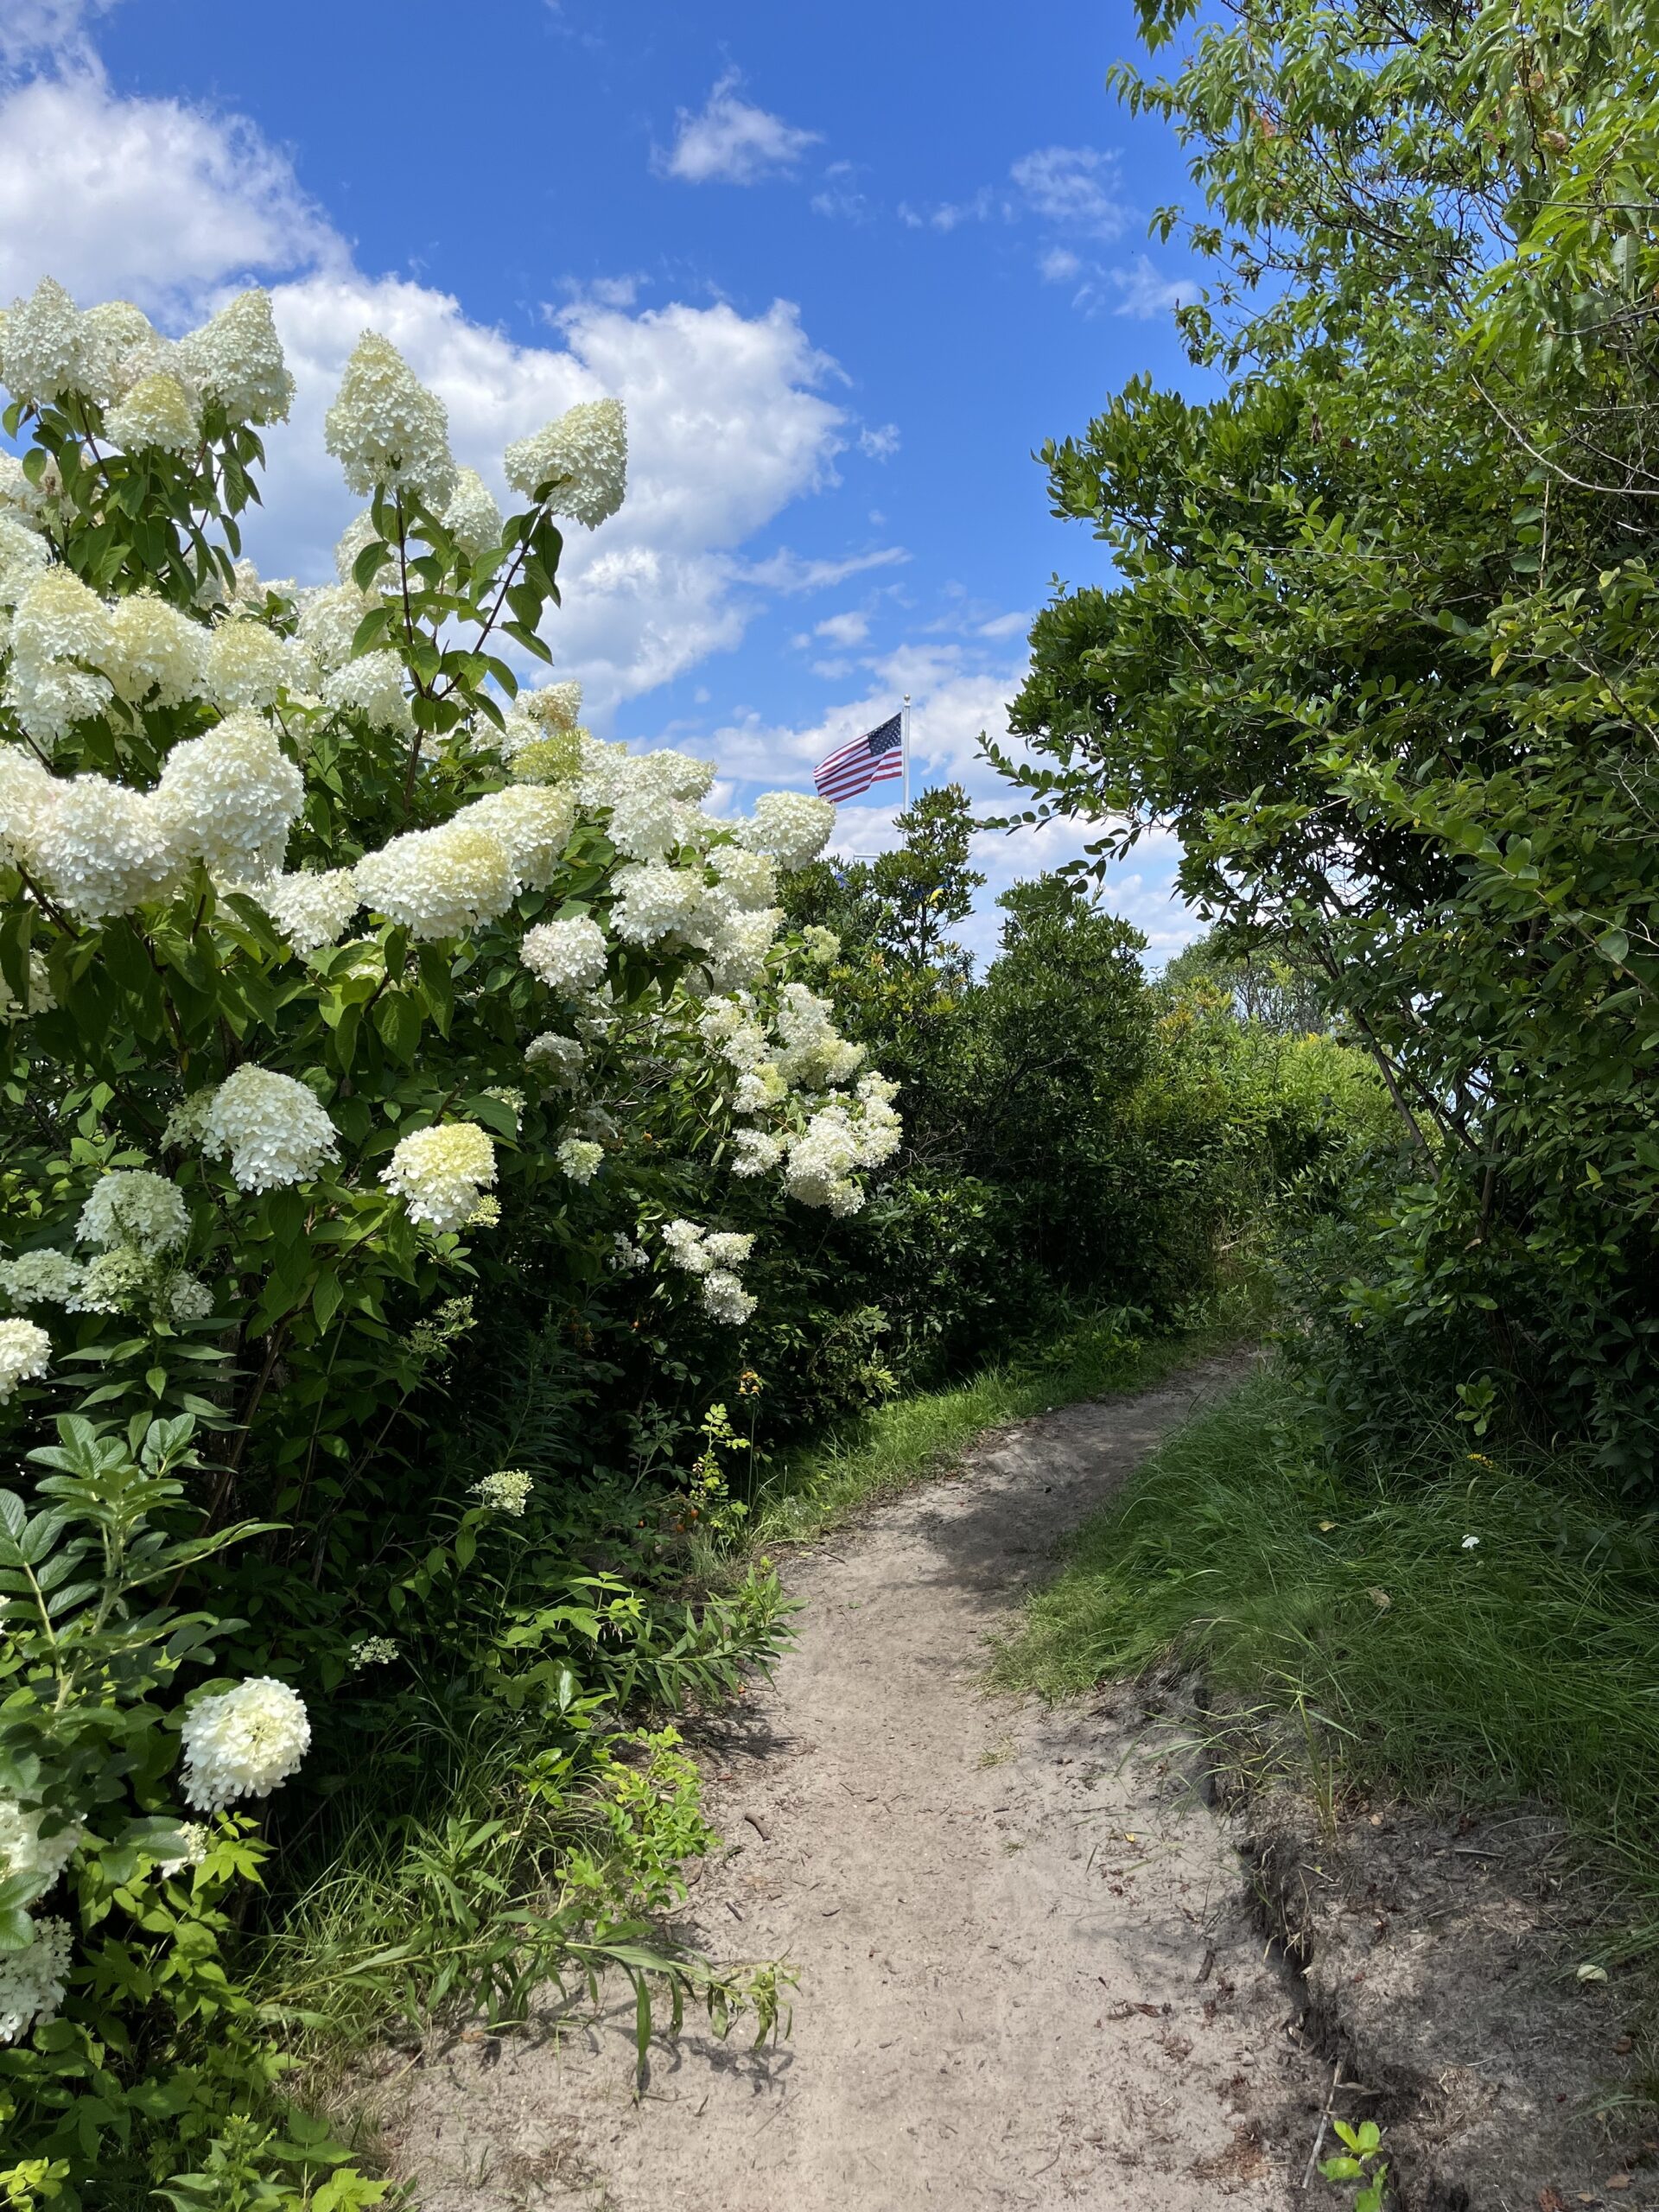 A narrow dirt path winds through lush greenery and white blooming flowers under a bright blue sky with scattered clouds. An American flag is partially visible in the distance beyond the foliage.